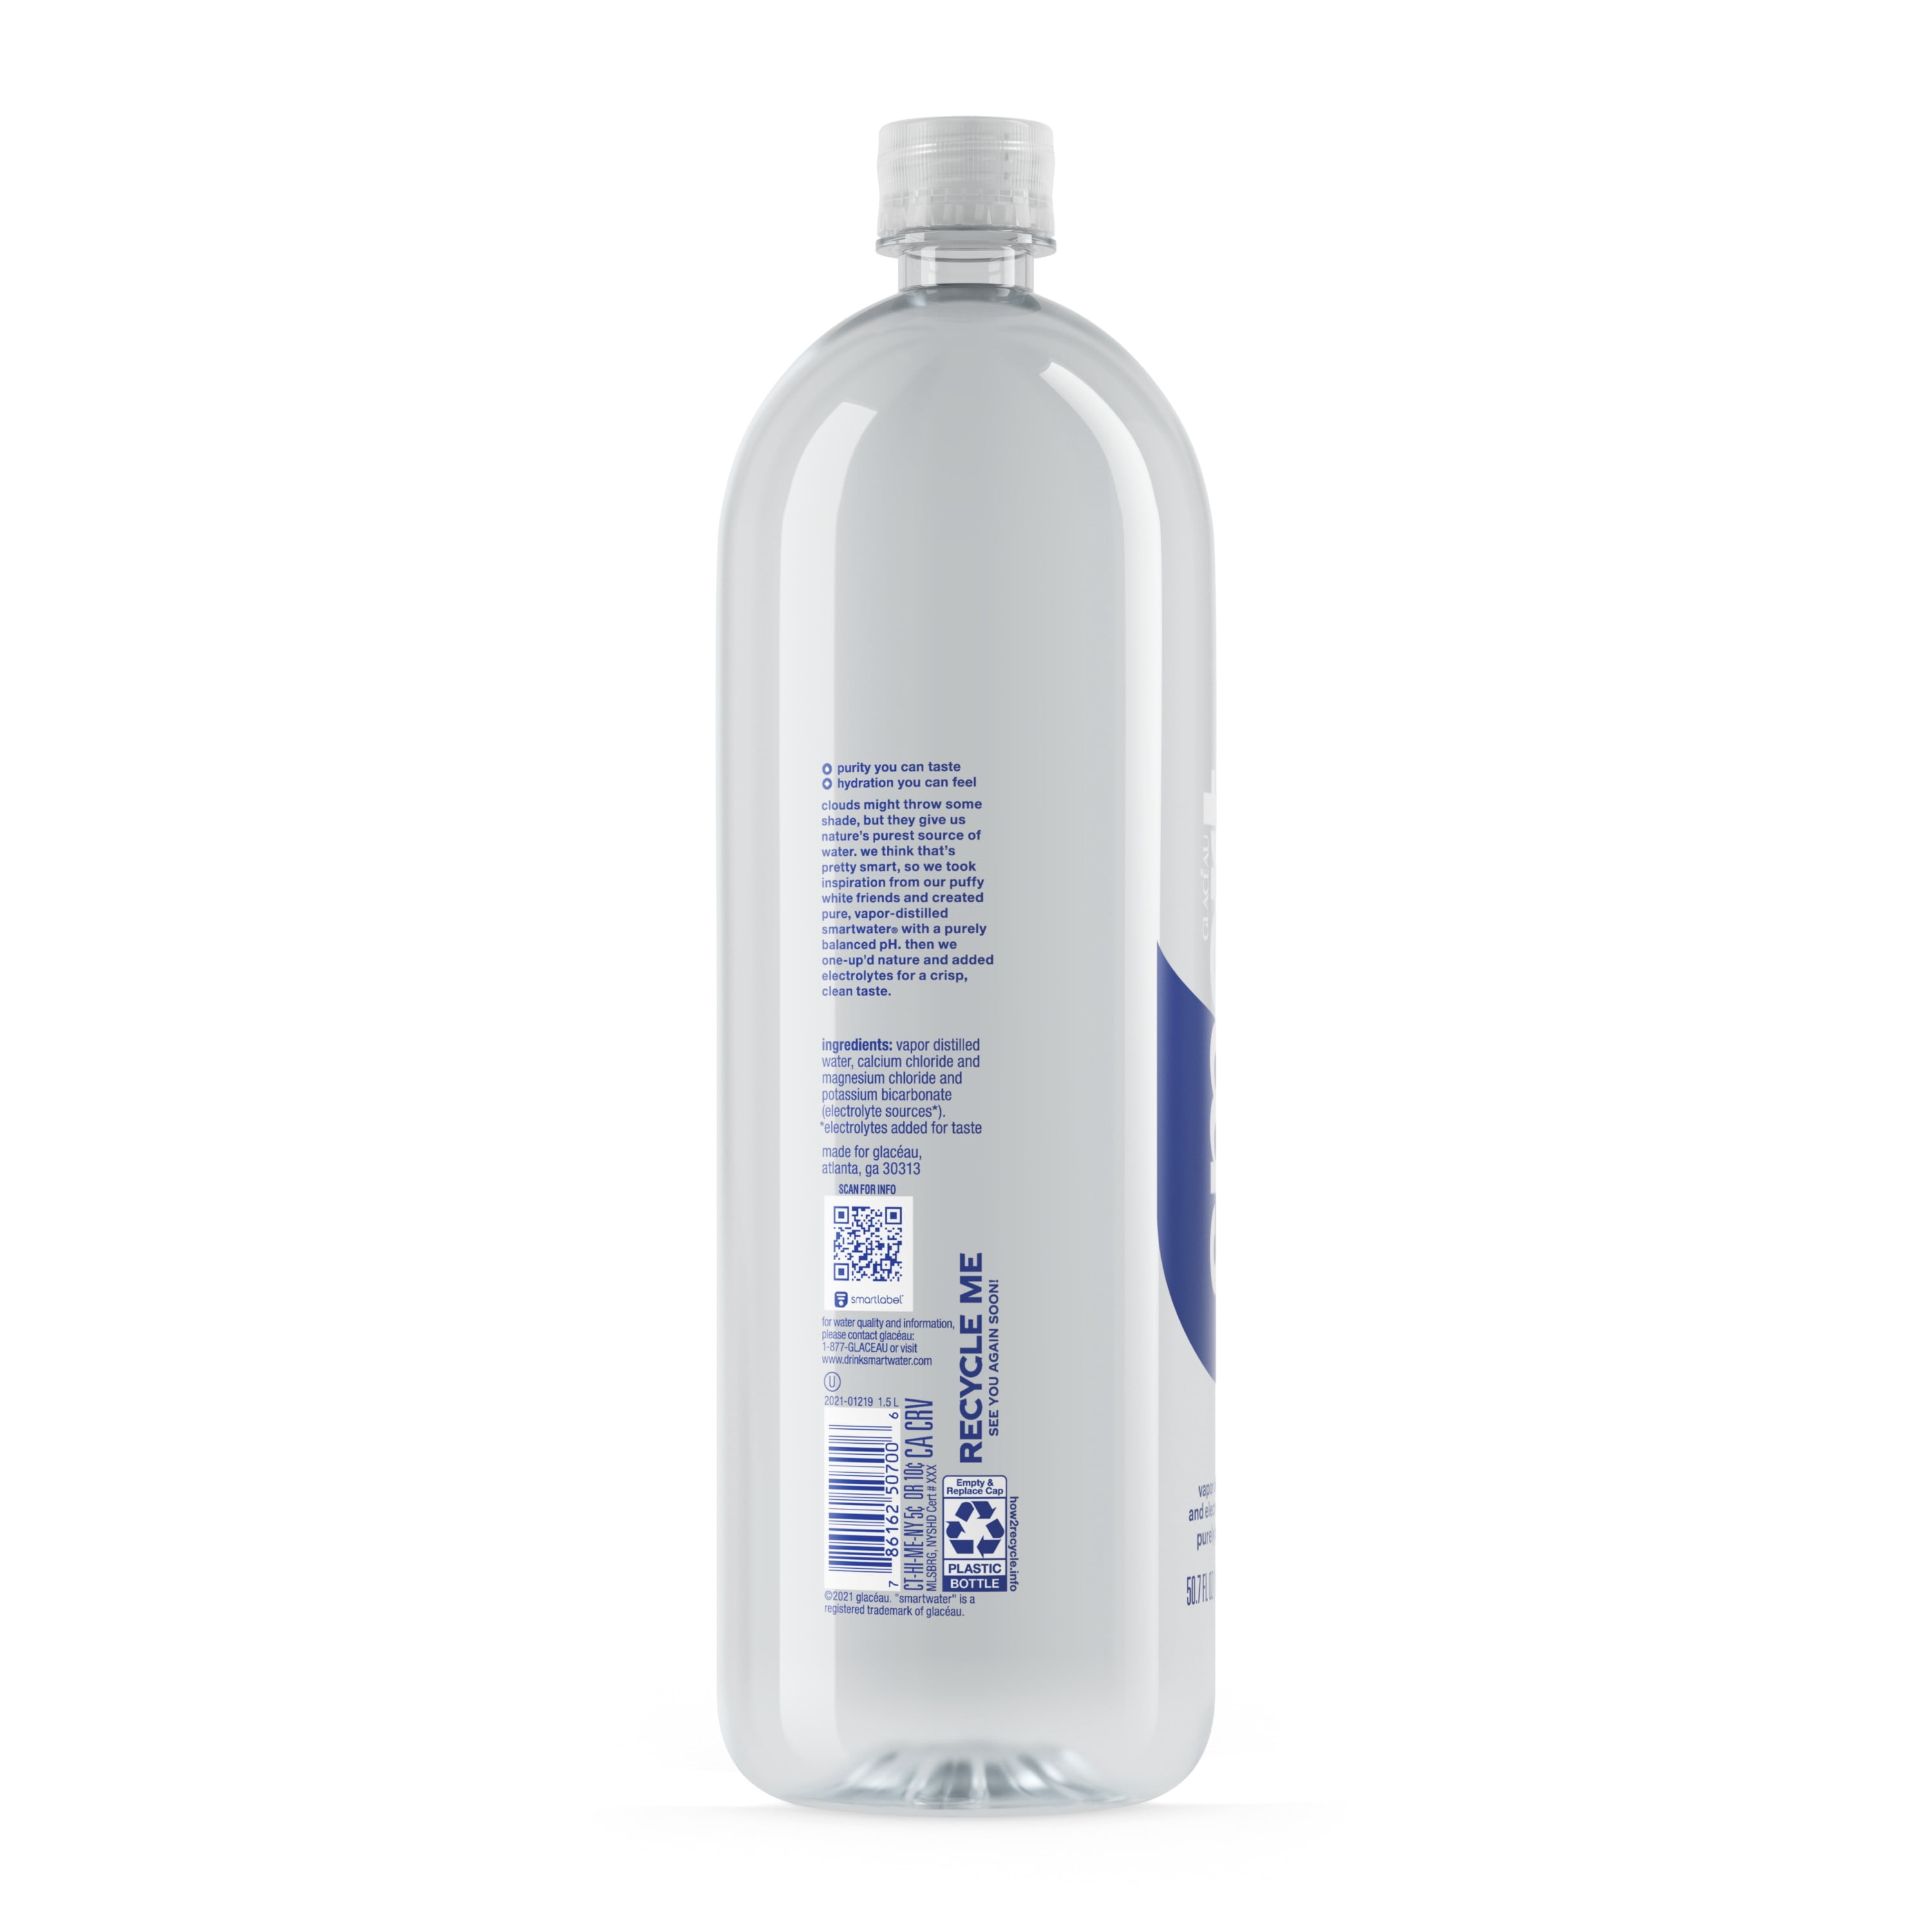 Virtū Distilled Water — Simply Pure — Distilled Water 5-Gallon Glass Bottle  – Virtu Distilled Water